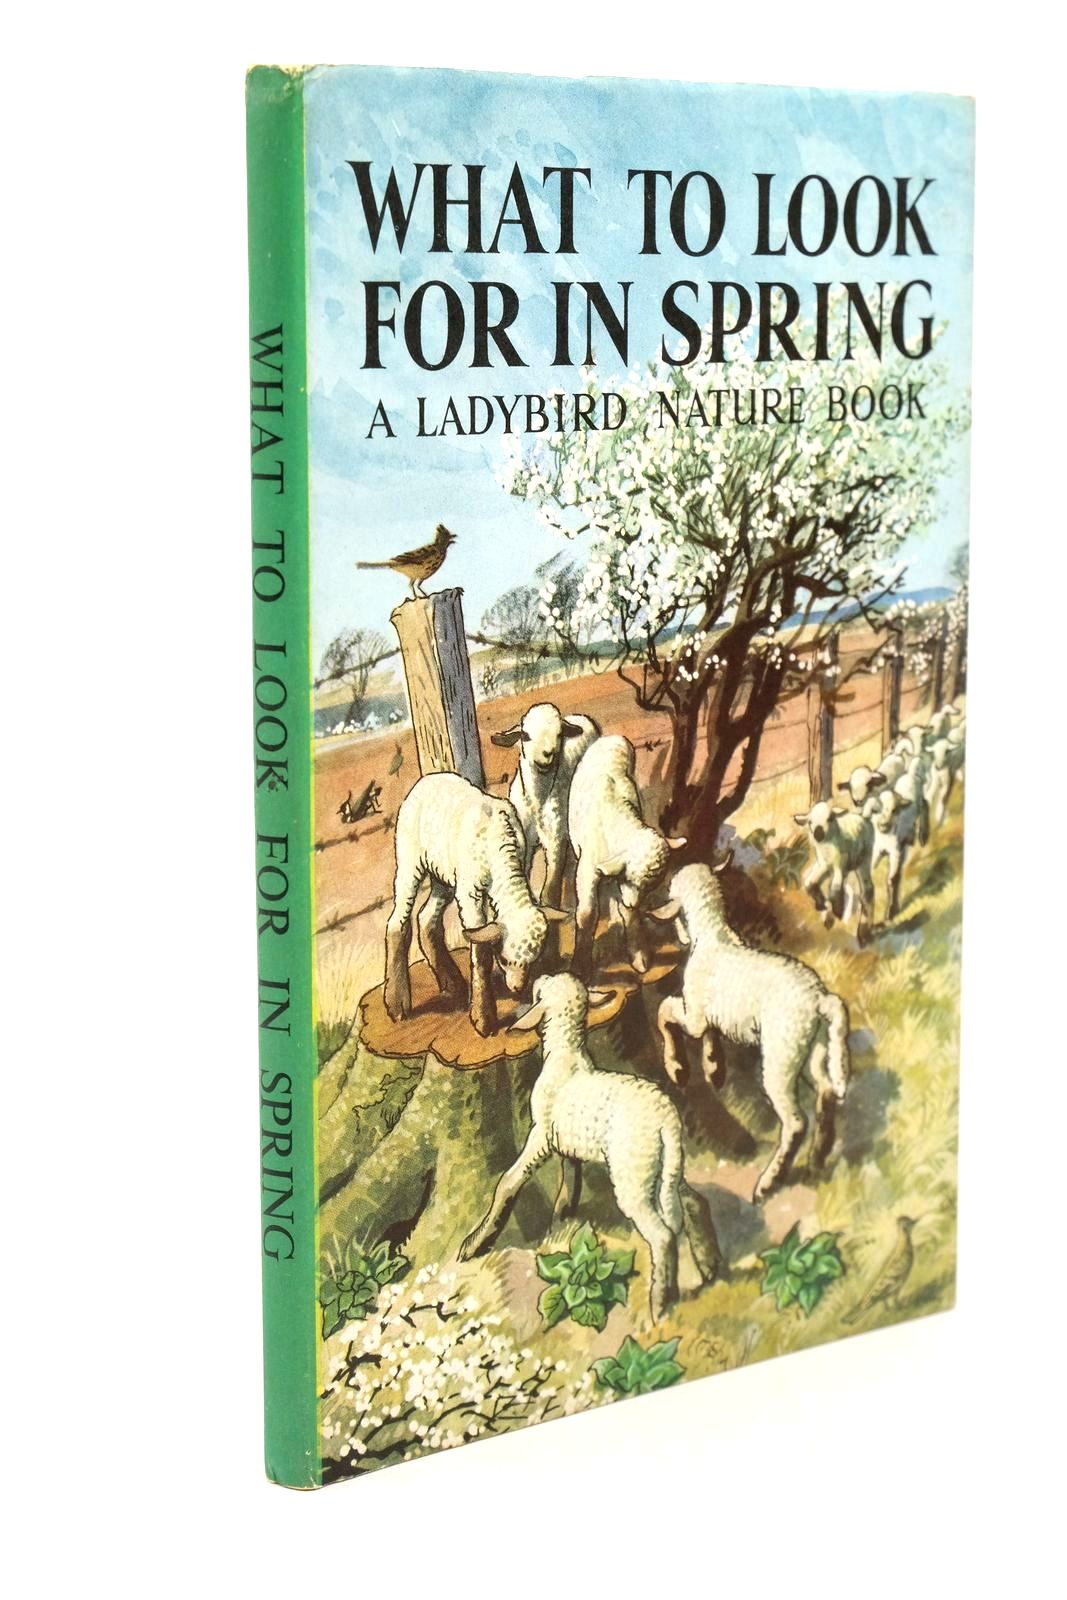 Photo of WHAT TO LOOK FOR IN SPRING written by Watson, E.L. Grant illustrated by Tunnicliffe, C.F. published by Wills & Hepworth Ltd. (STOCK CODE: 1323146)  for sale by Stella & Rose's Books